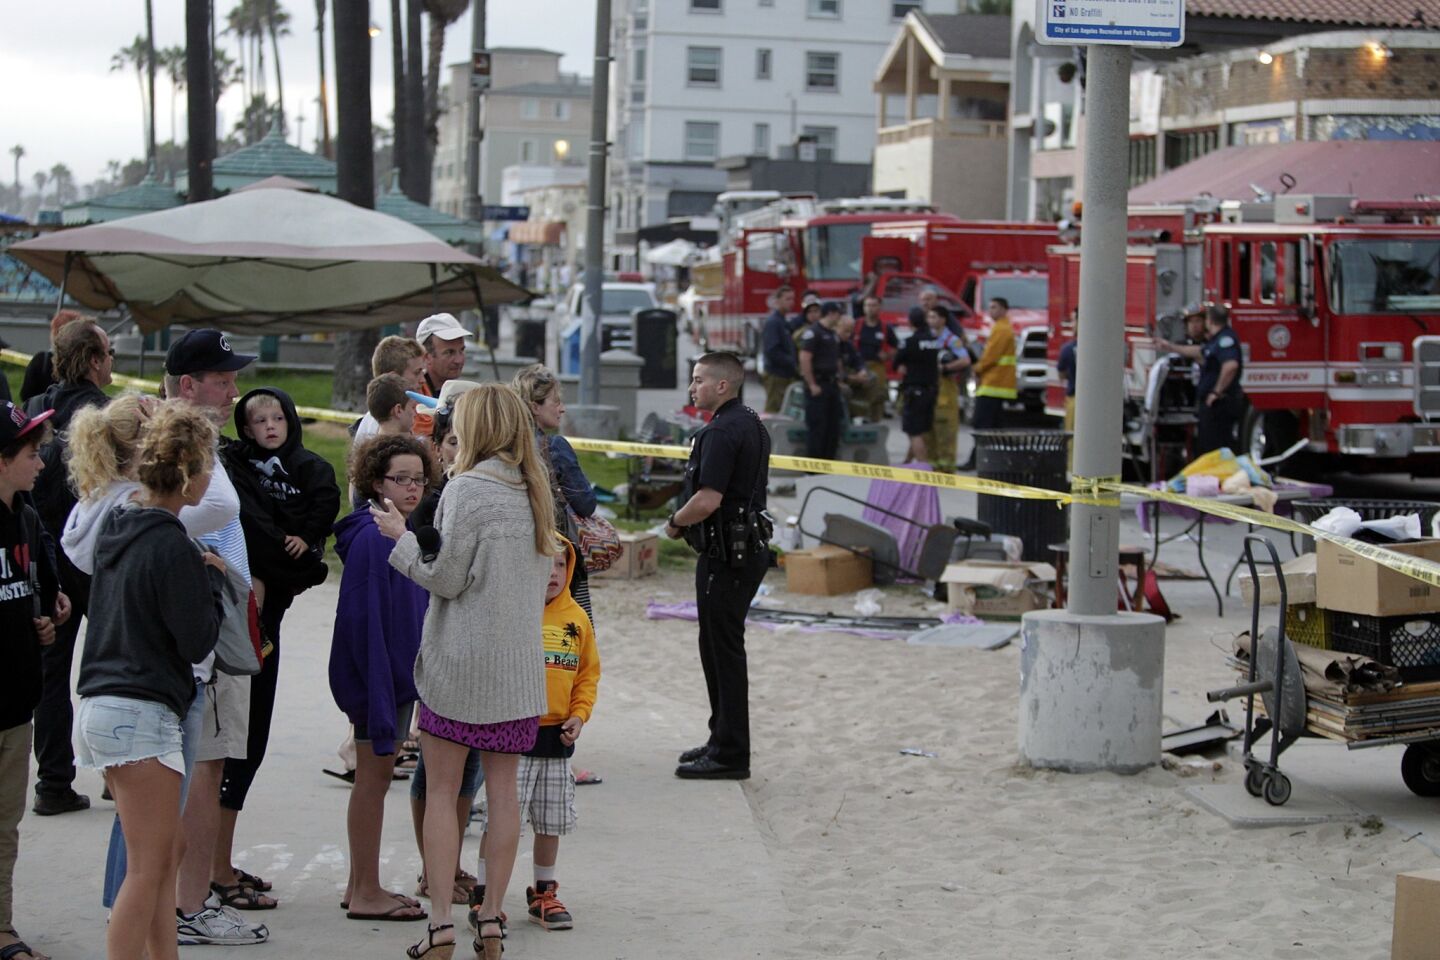 Bystanders, police and firefighters at the scene of the Aug. 3, 2013, incident in which a crowd of pedestrians was struck in Venice Beach.